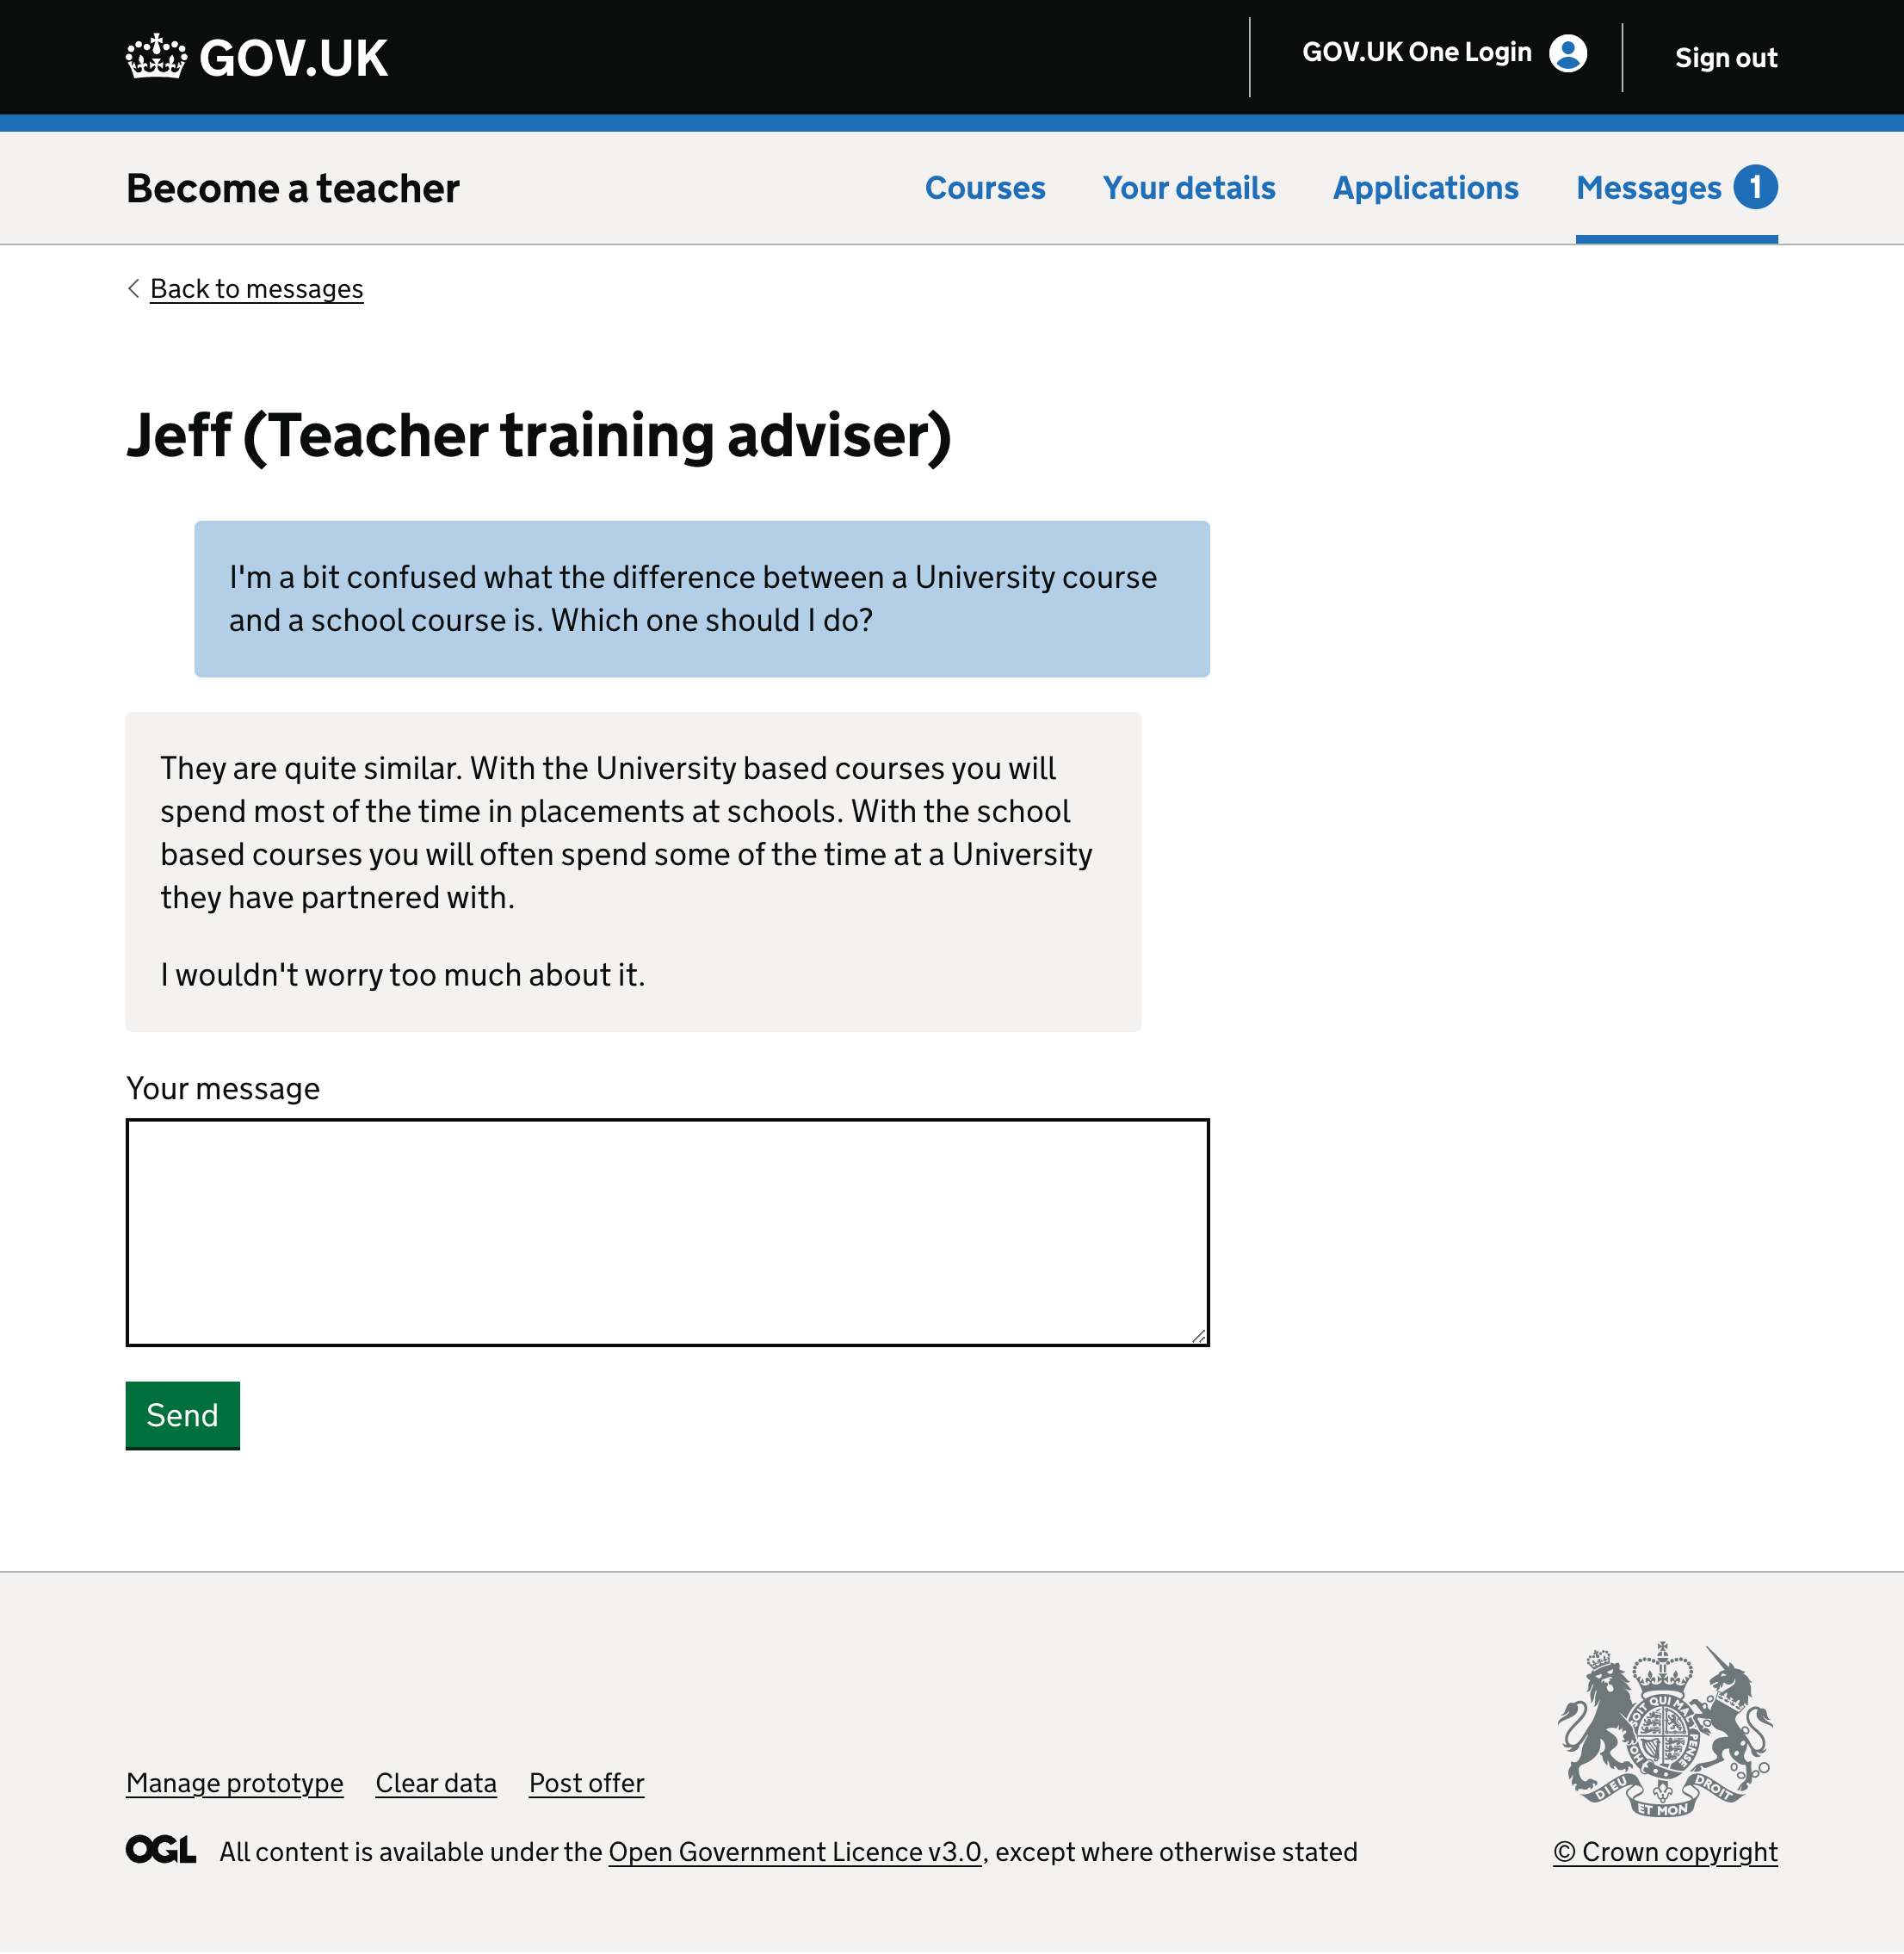 Screenshot showing a page with messages to and from a teacher tranining provider